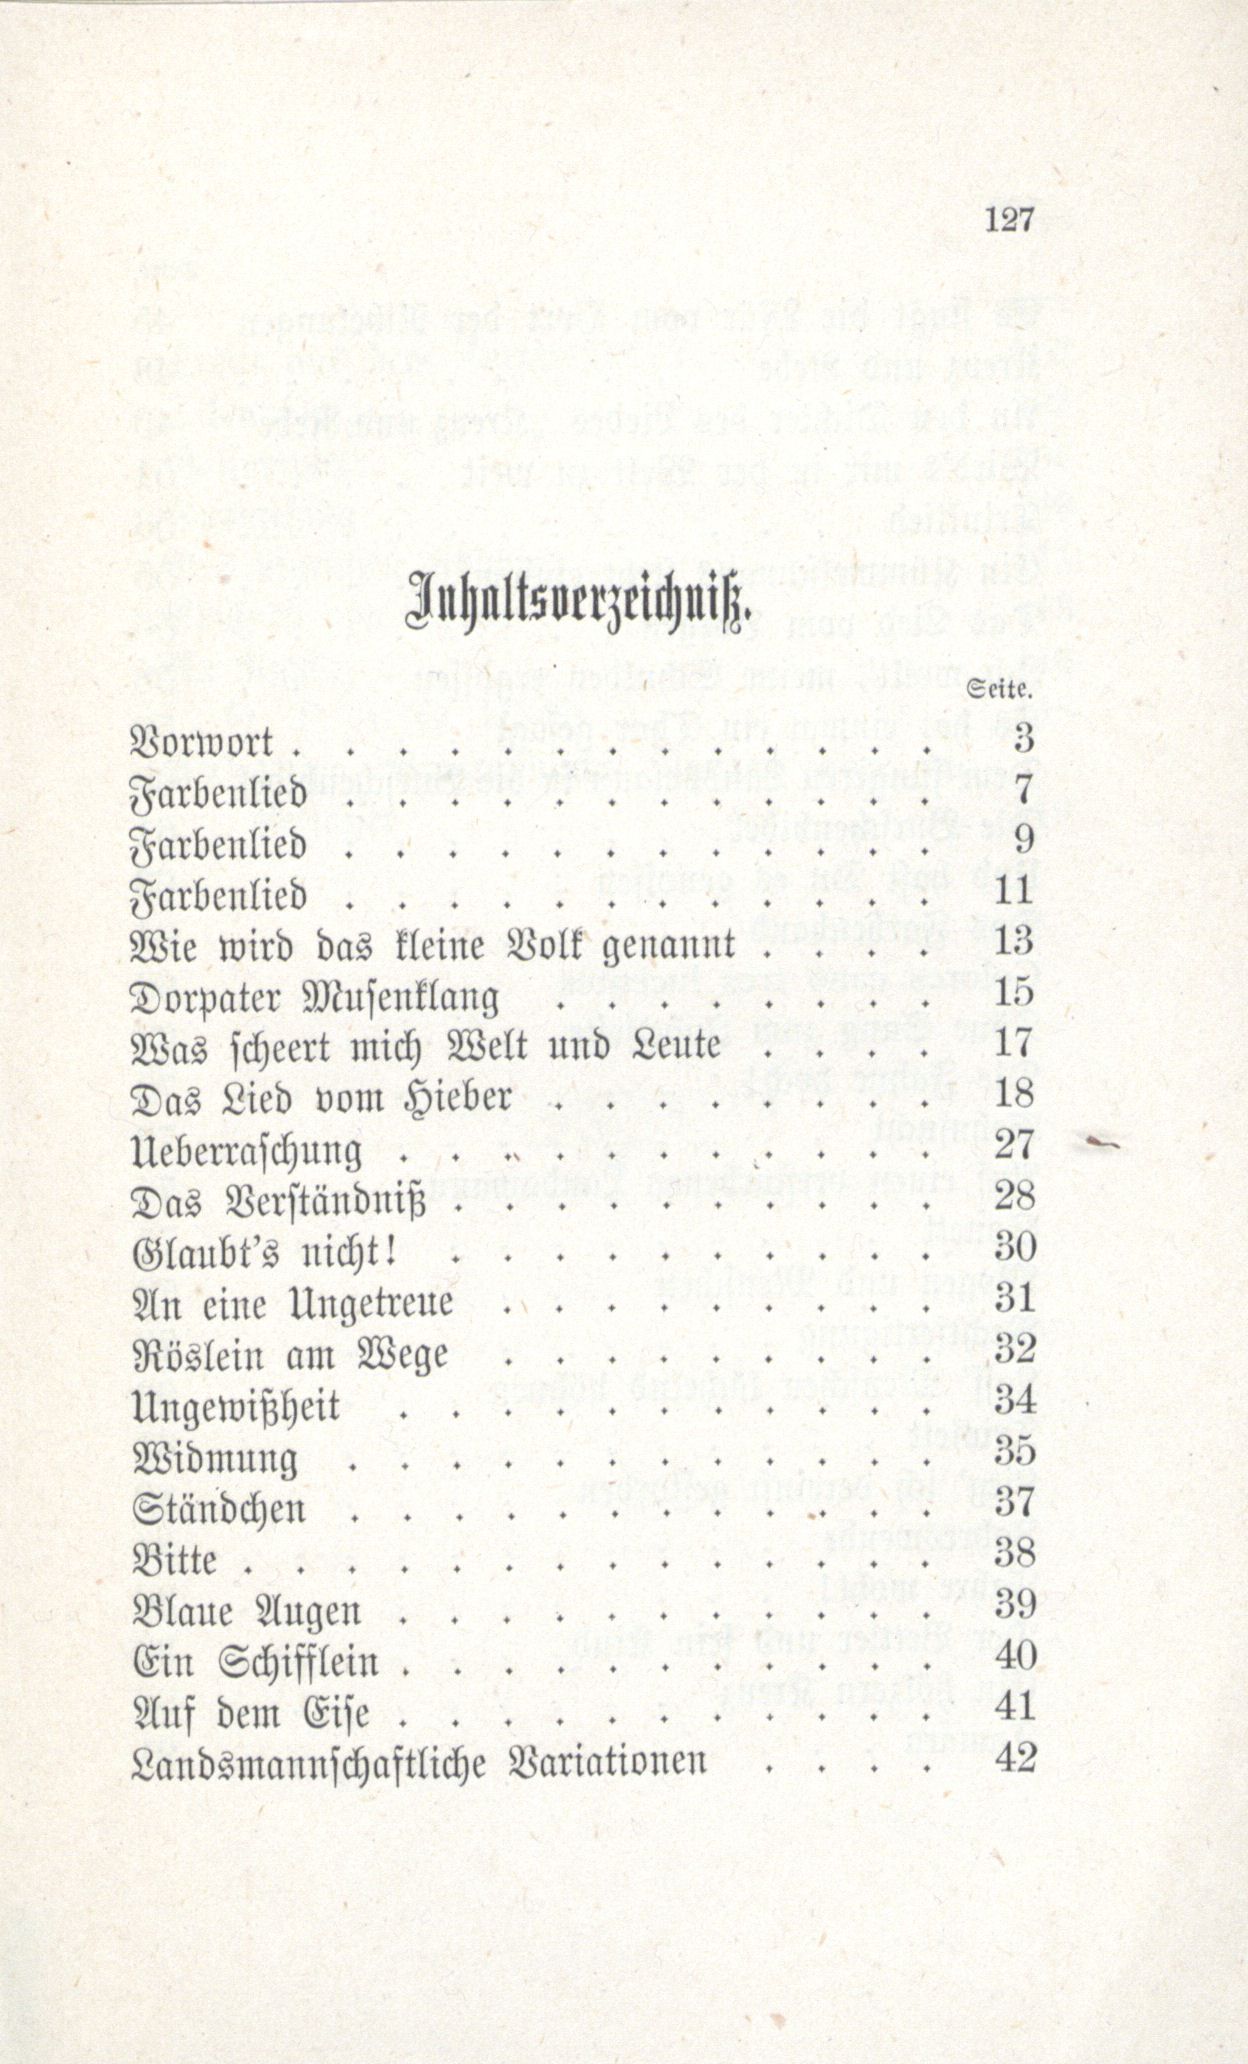 Erinnerung an die Fraternitas (1880) | 127. (127) Table of contents